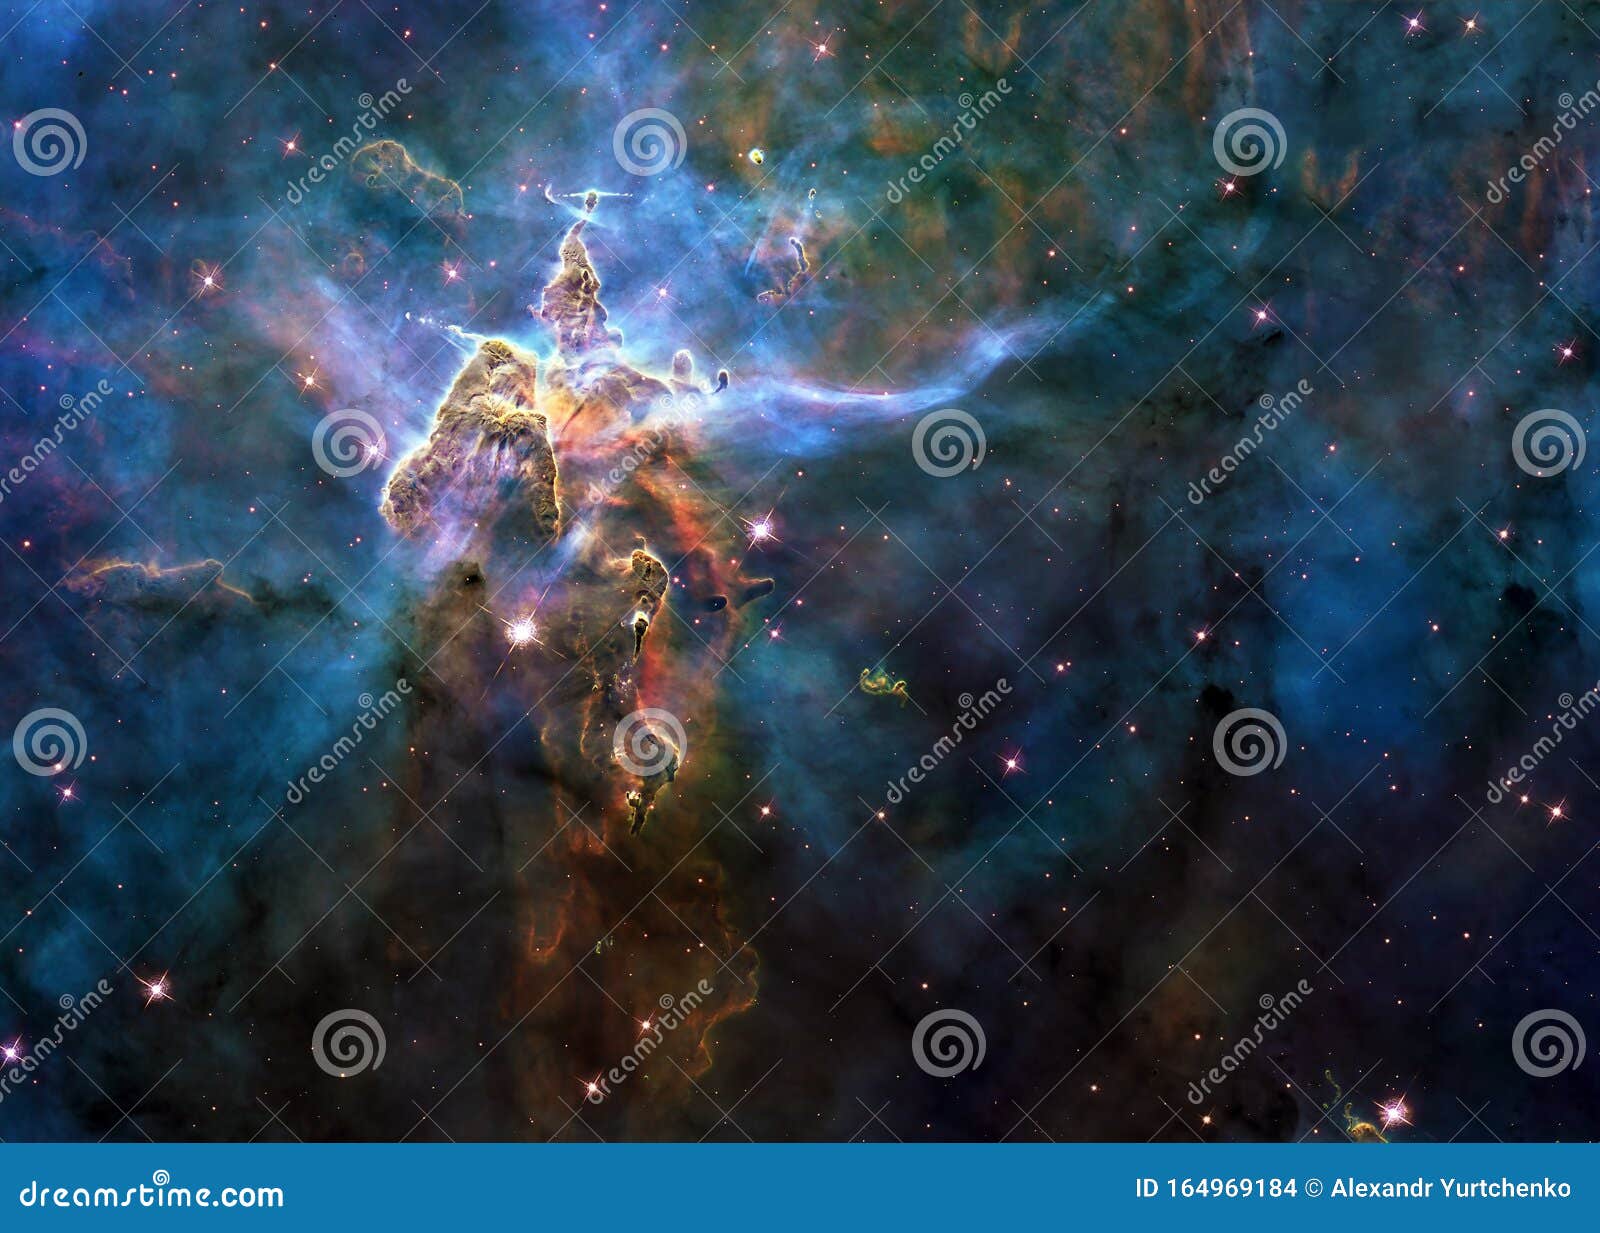 VLT Takes Most Detailed Infrared Image of the Carina Nebula Space Wallpaper   Space